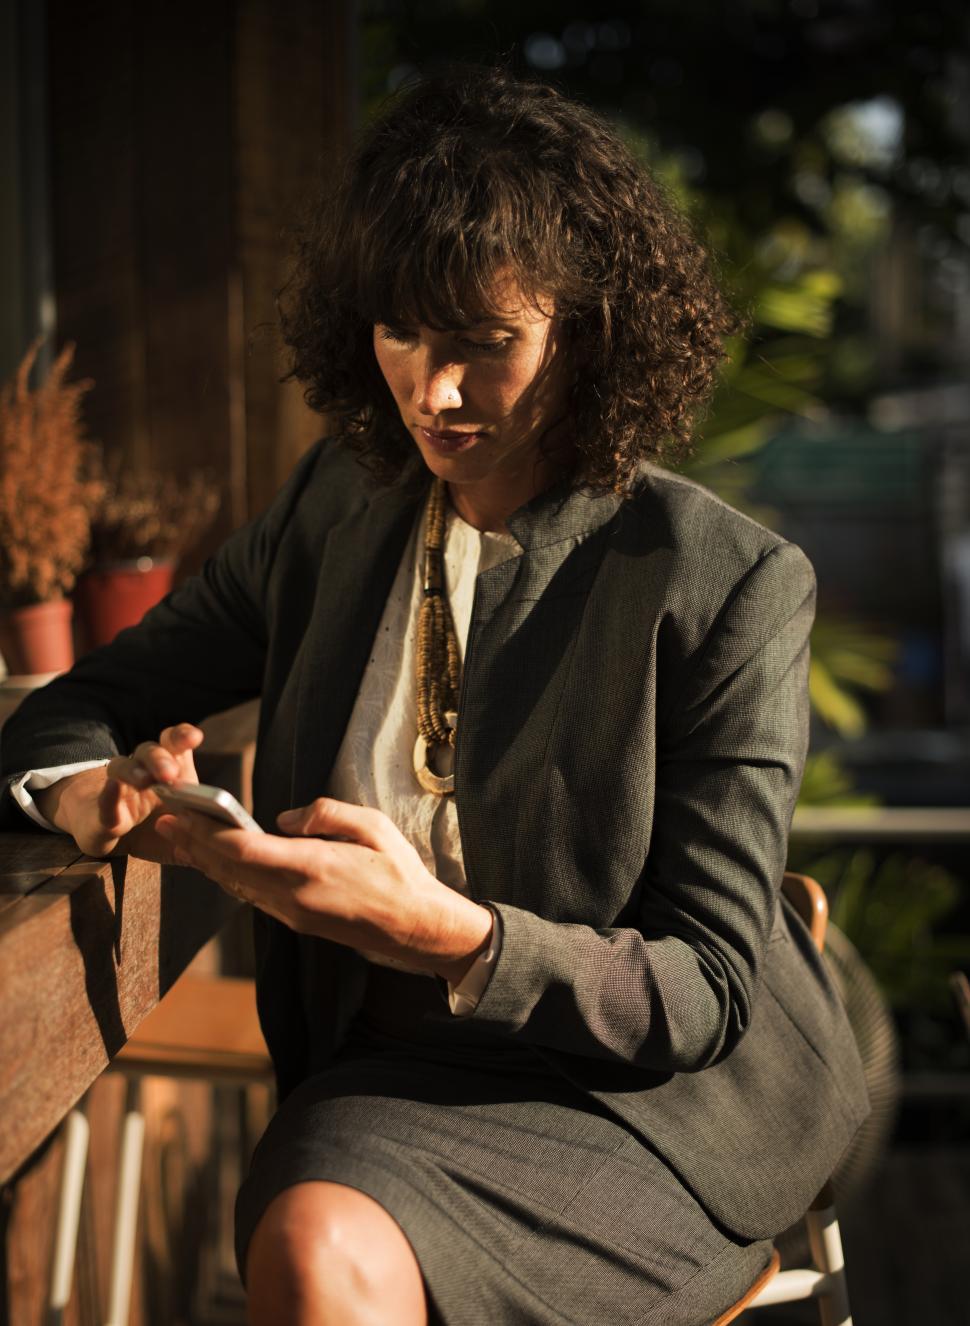 Free Image of A woman looking at her mobile phone, sitting outside 